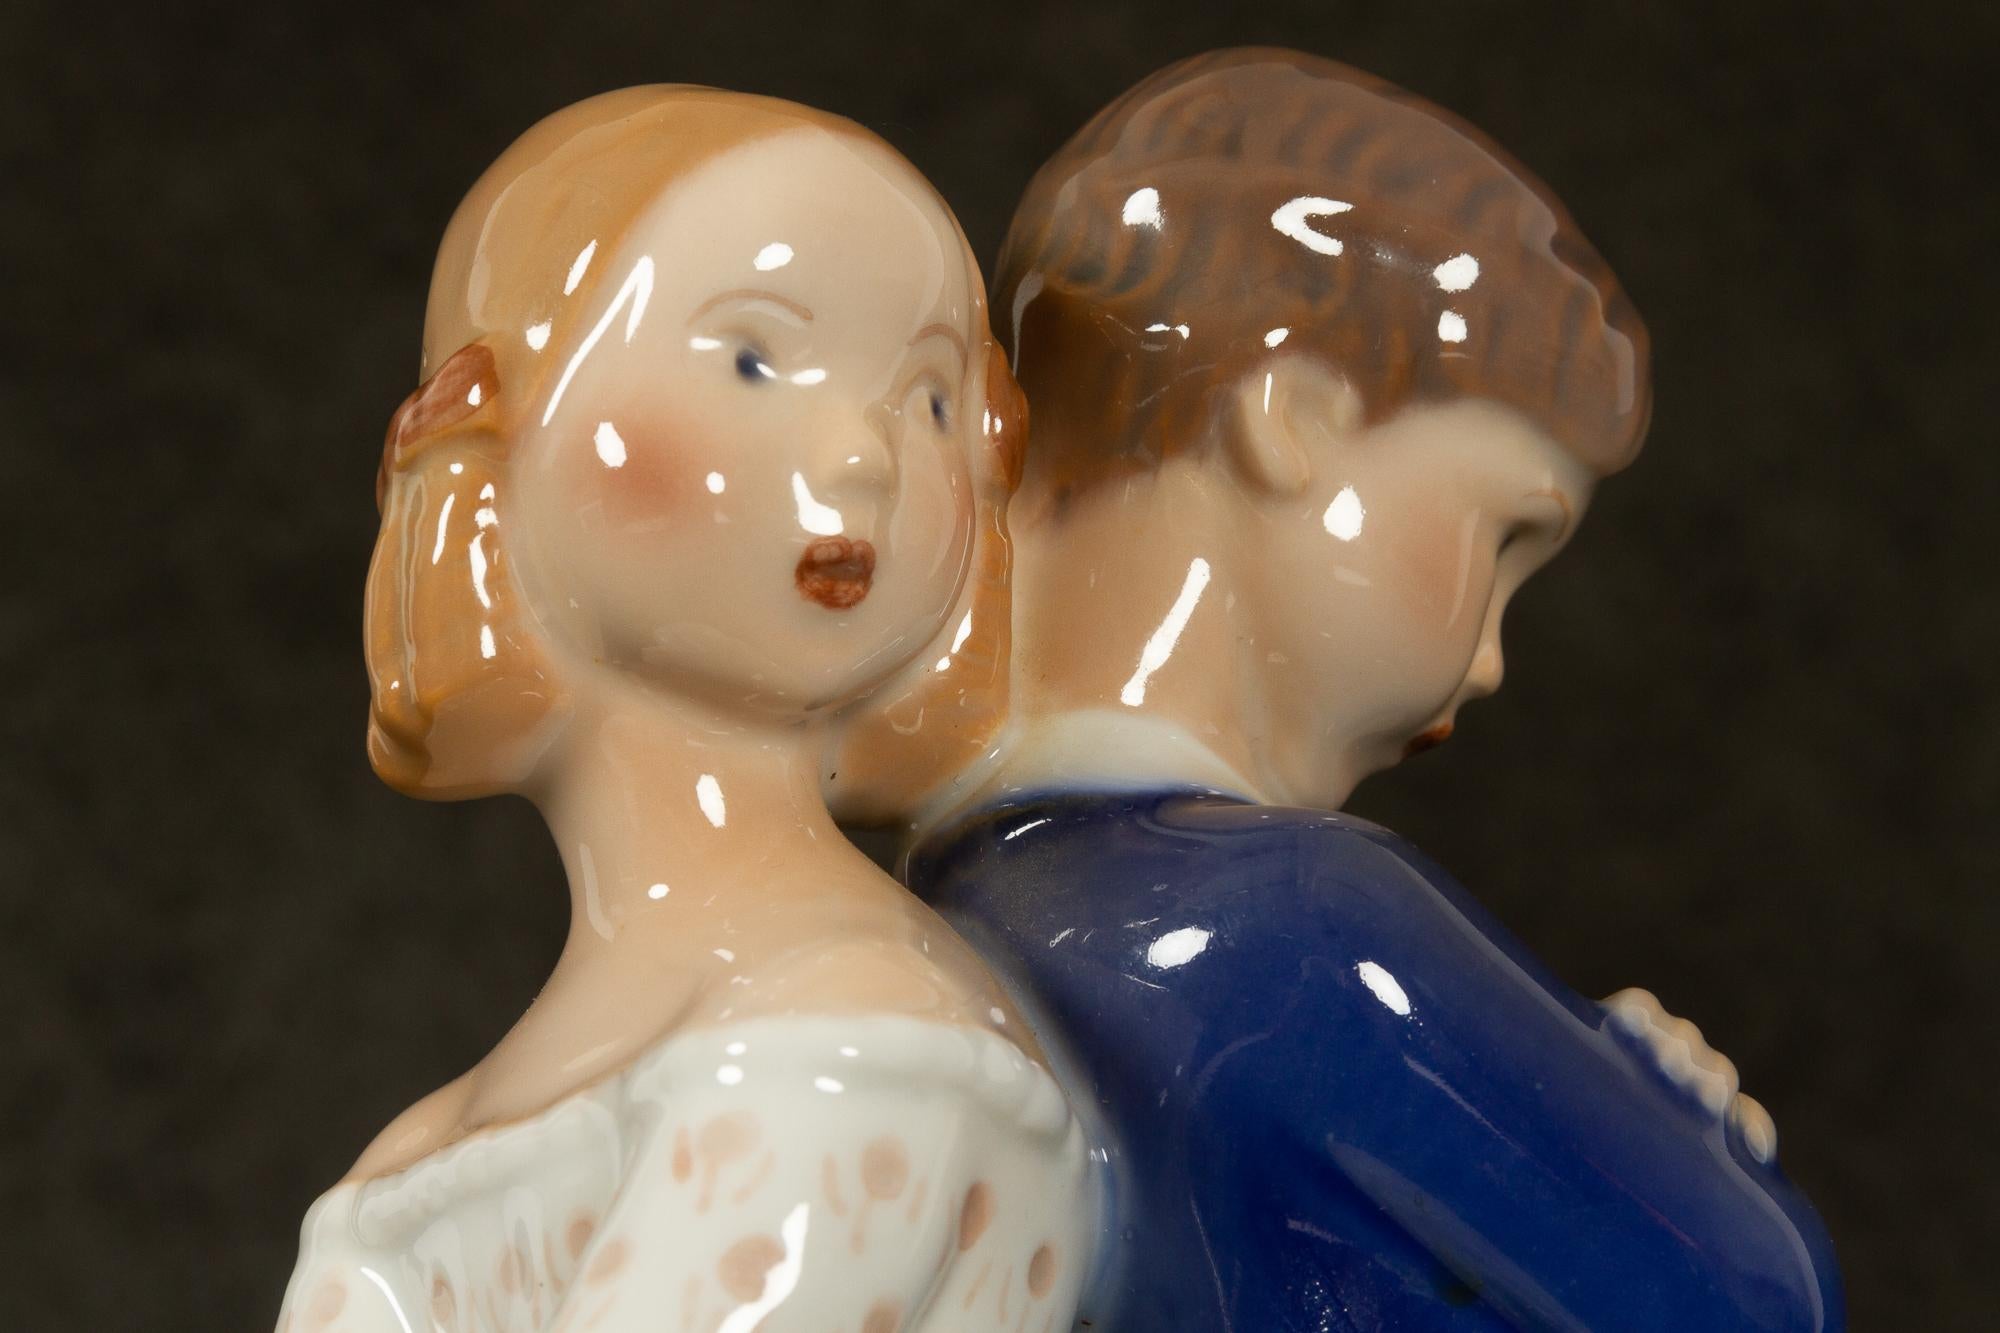 Vintage Danish Porcelain Figurine by Claire Weiss for Bing & Grøndahl, 1970s In Good Condition For Sale In Asaa, DK